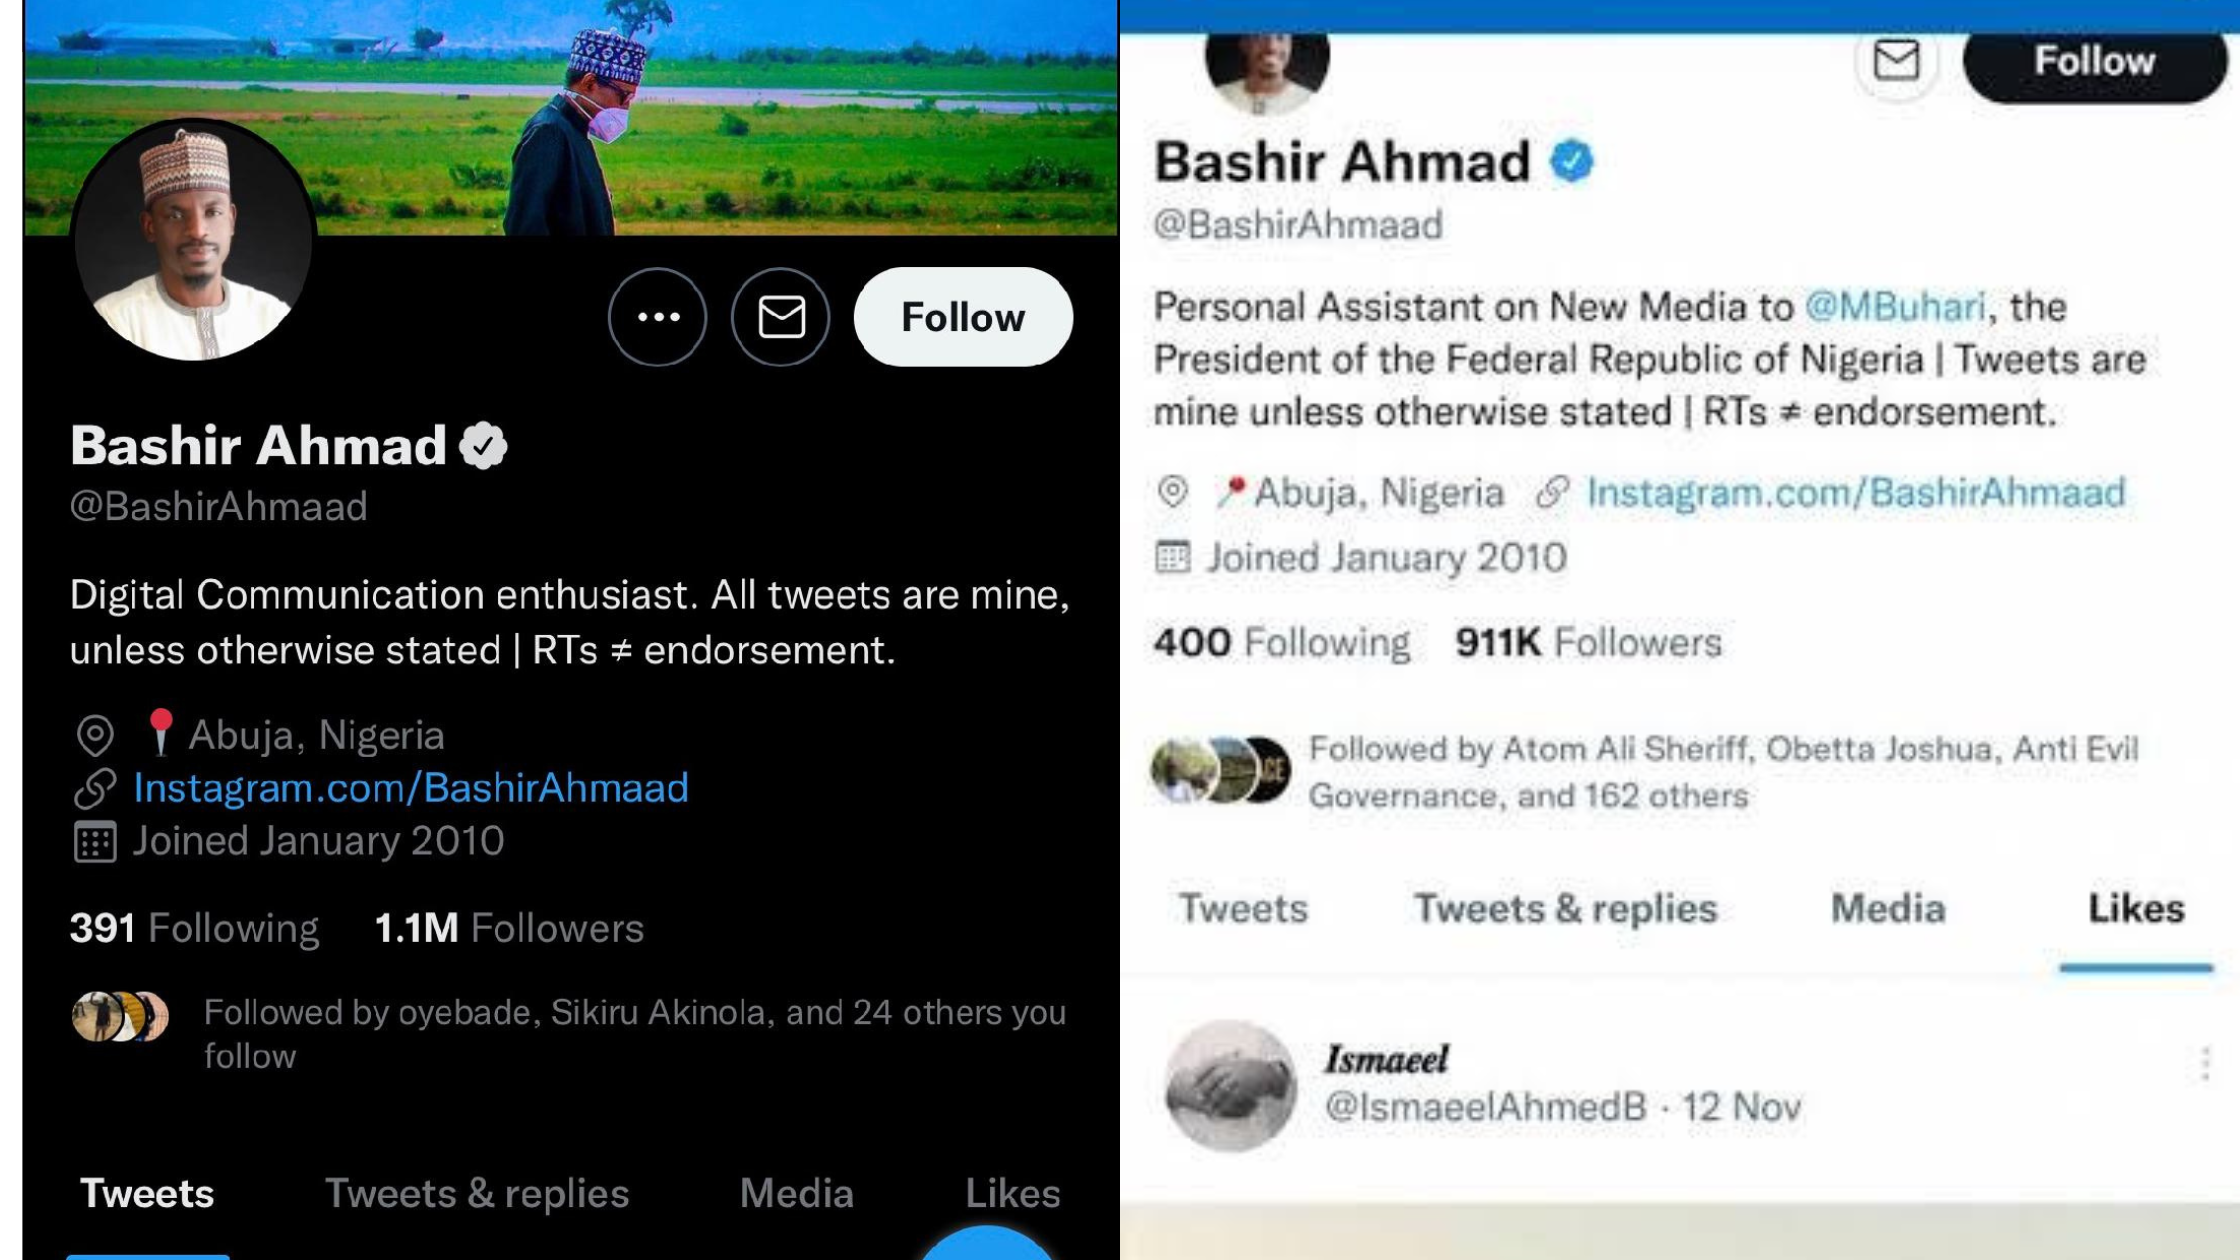 [GIST] Bashir Ahmad Removes Presidential Aide From Twitter Account After Buhari Ordered Cabinet Members Seeking Elective Posts To Resign